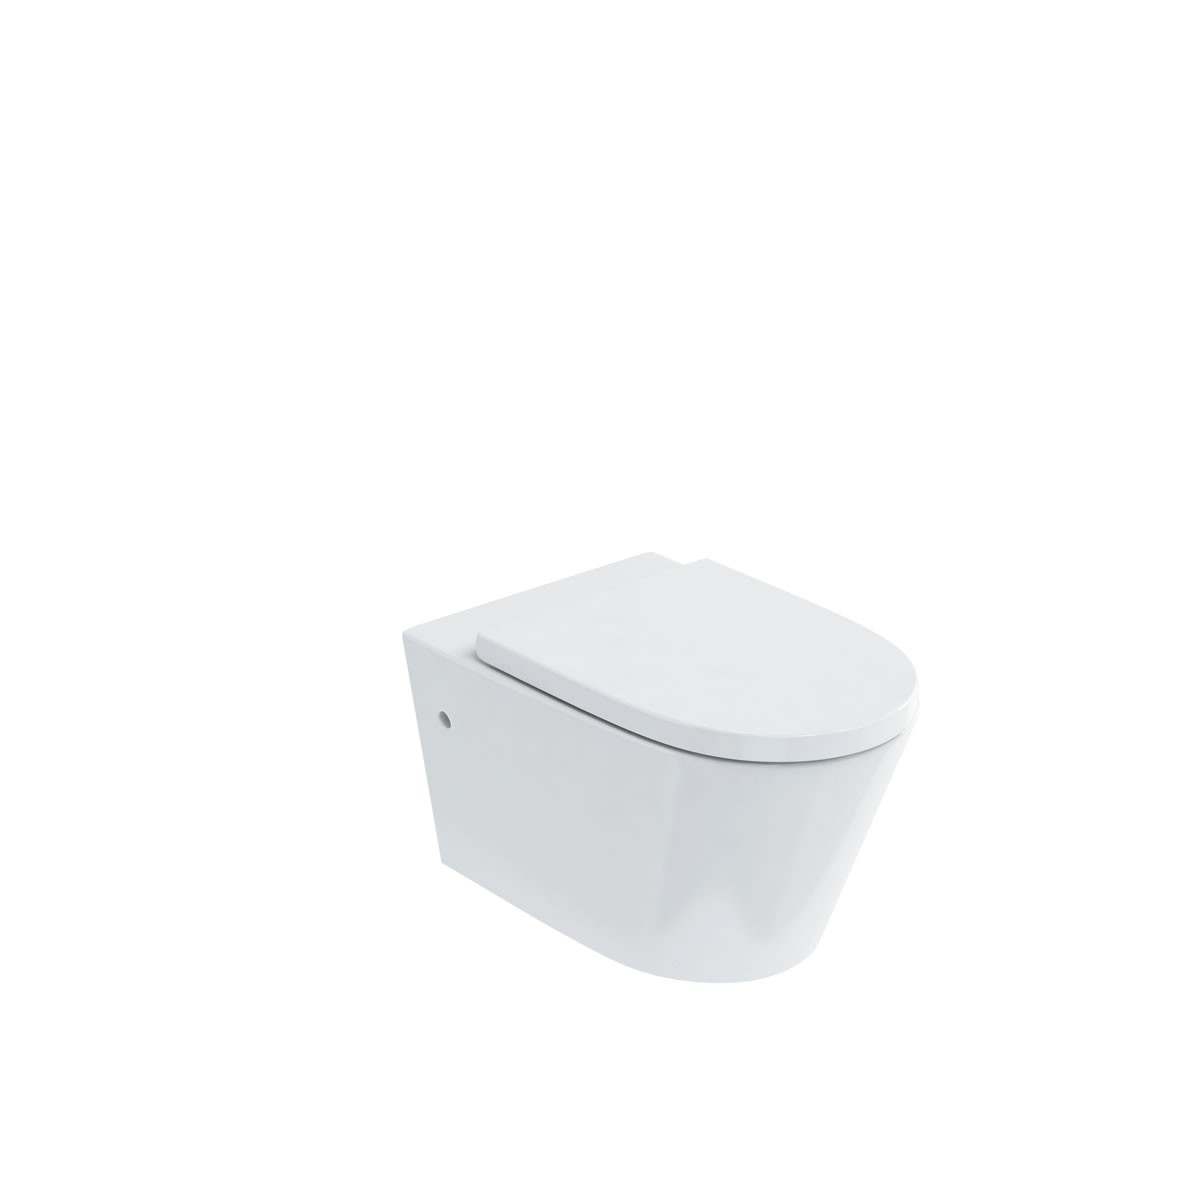 Britton 15B35303 Sphere Rimless Wall Mounted WC Pan with Toilet Seat White - (Cistern NOT Included)